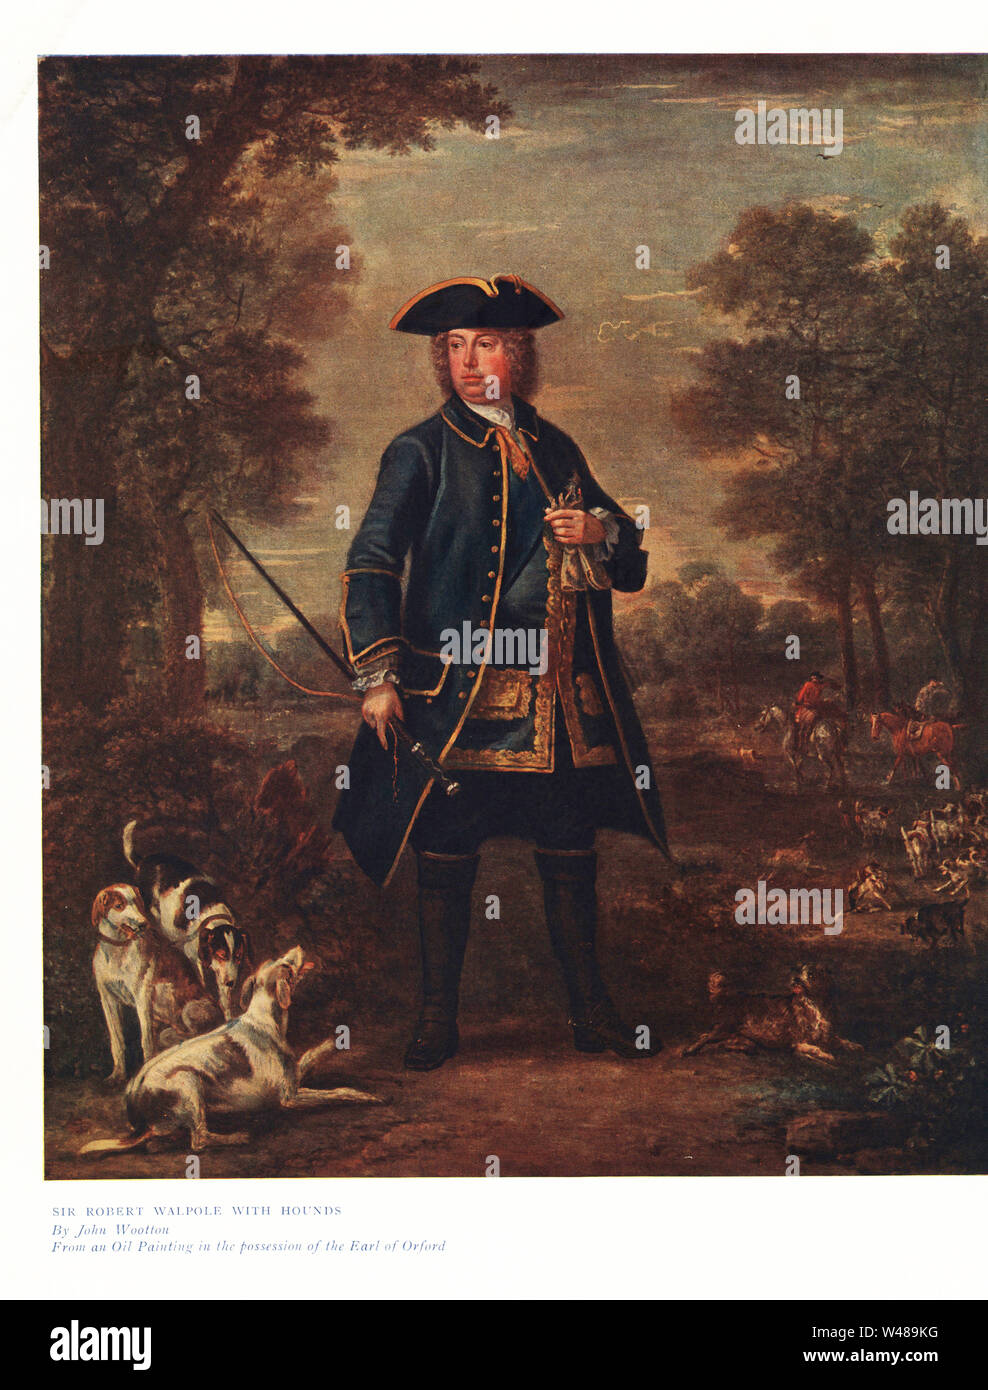 Sir Robert Walpole with hounds, a fox hunt in the background. Color print from an illustration by John Wootton in Ralph Nevill’s Old Sporting Prints, The Connoisseur Magazine, London, 1908. Stock Photo